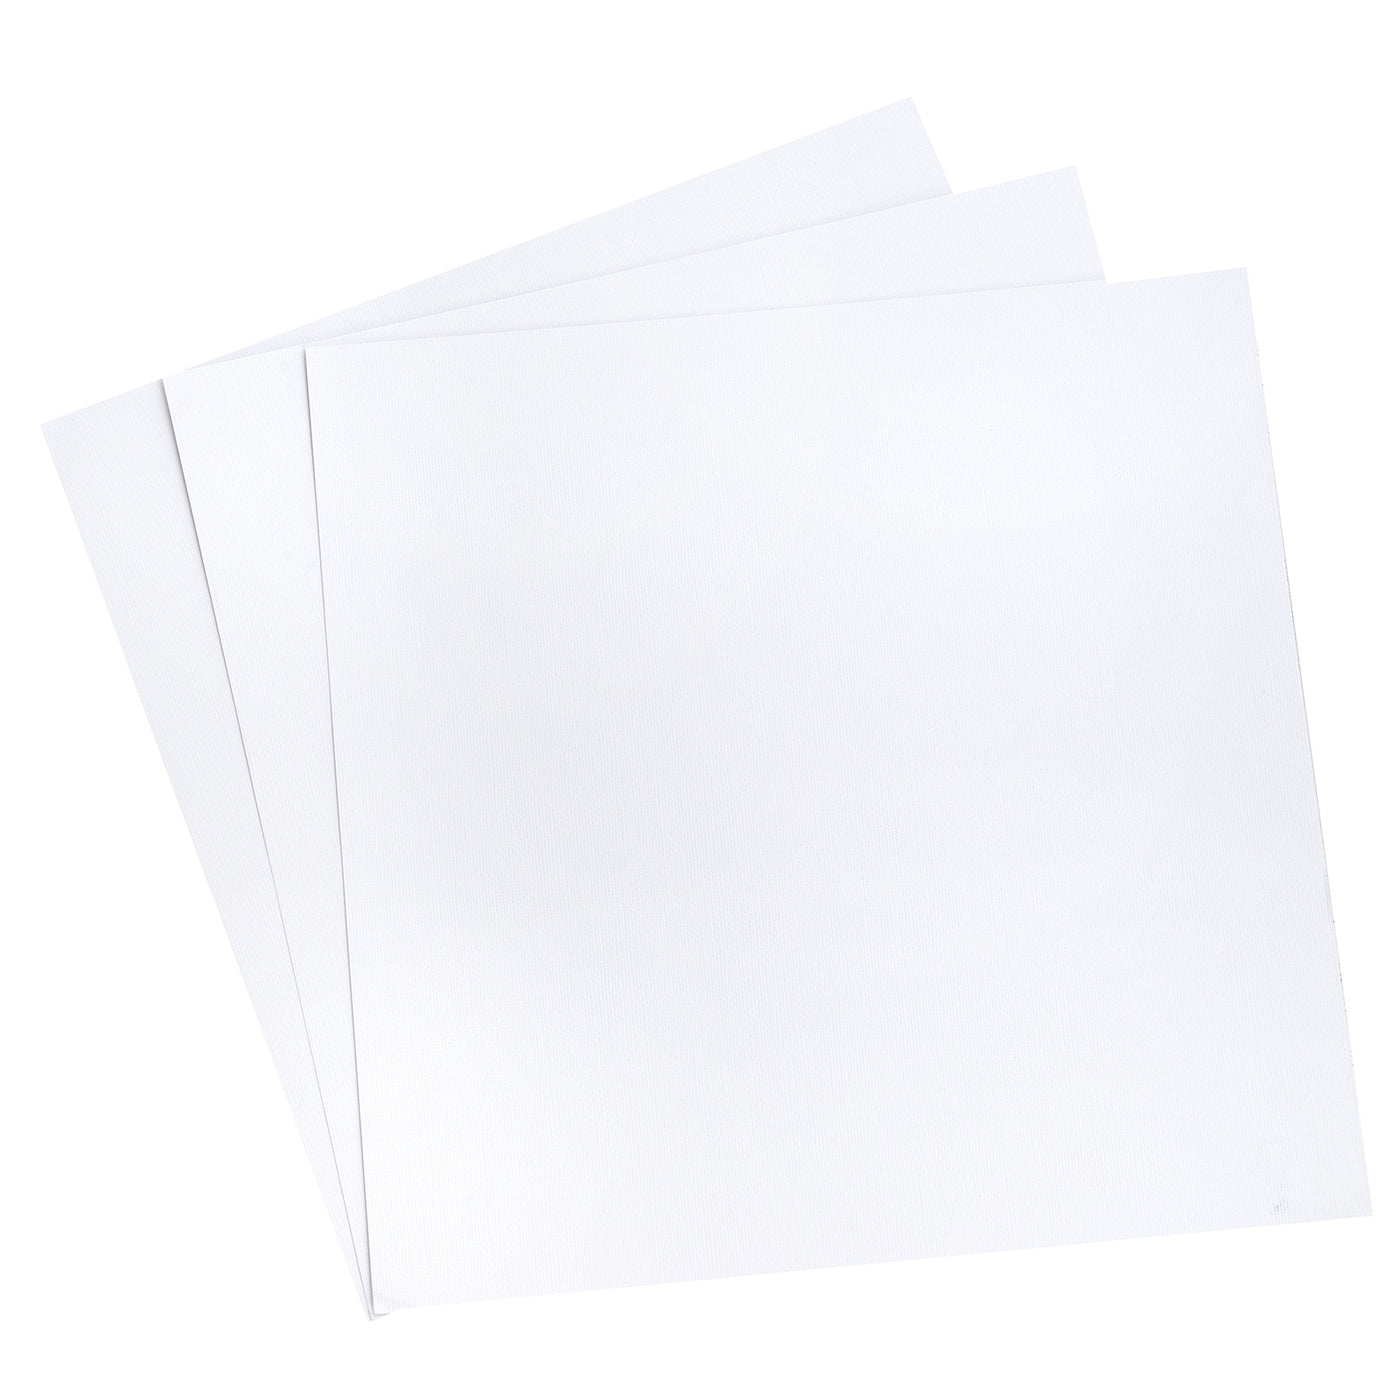 American Crafts Textured Cardstock Pack 5X7 Solid White